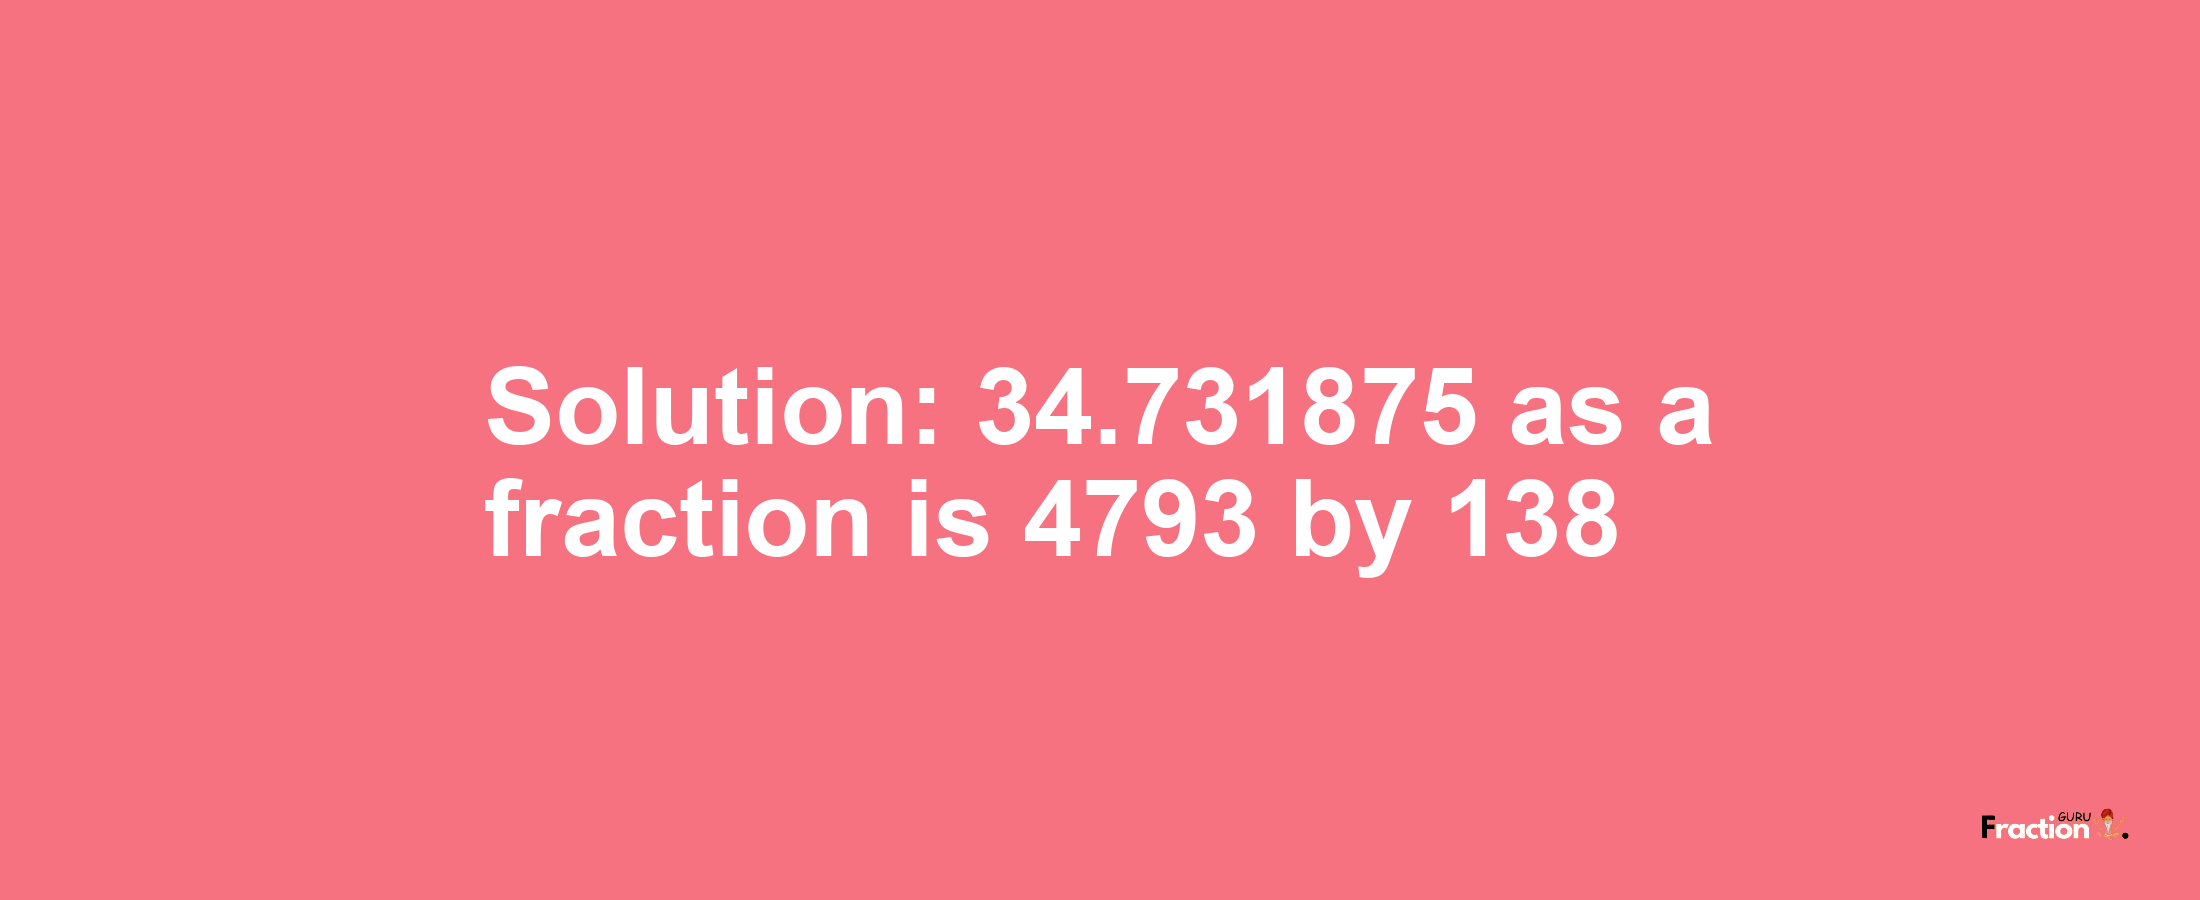 Solution:34.731875 as a fraction is 4793/138